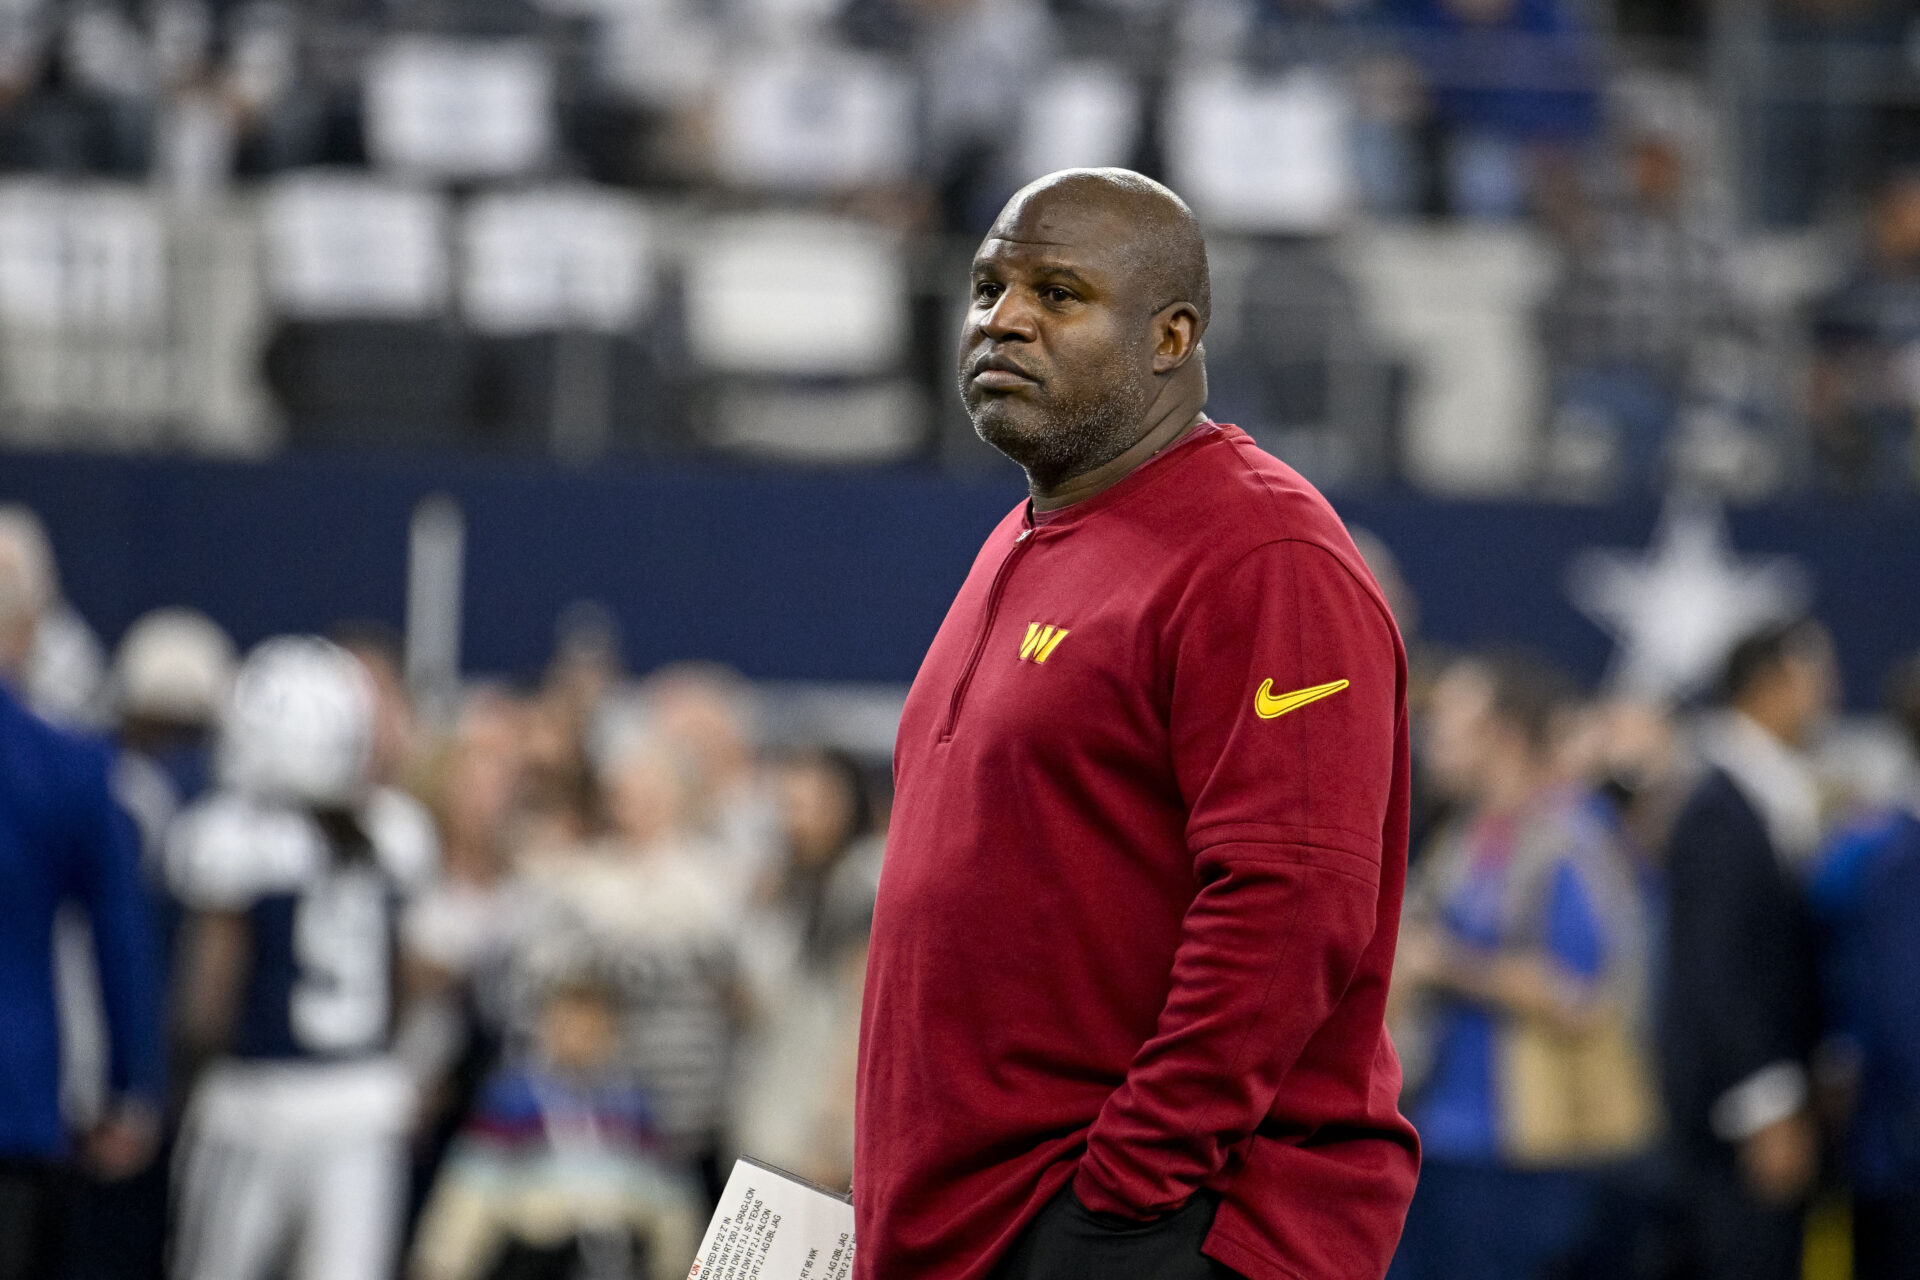 Washington Commanders offensive coordinator Eric Bieniemy before the game between the Dallas Cowboys and the Washington Commanders at AT&T Stadium.